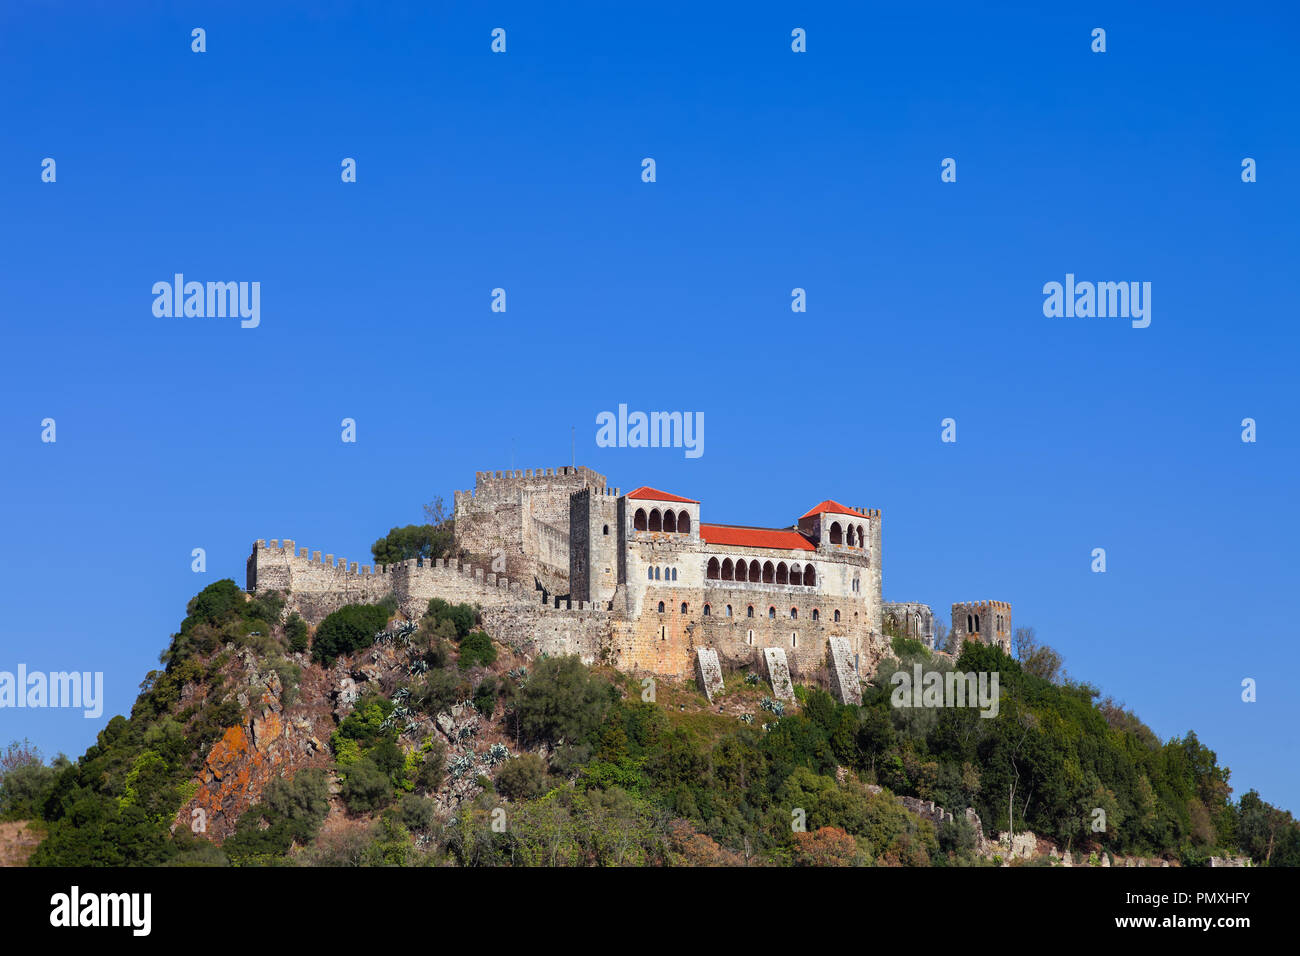 Medieval Leiria Castle built on top of a hill with a view over the Gothic Palatial Residence or Pacos Novos. A Templar Knights Castle. Portugal Stock Photo